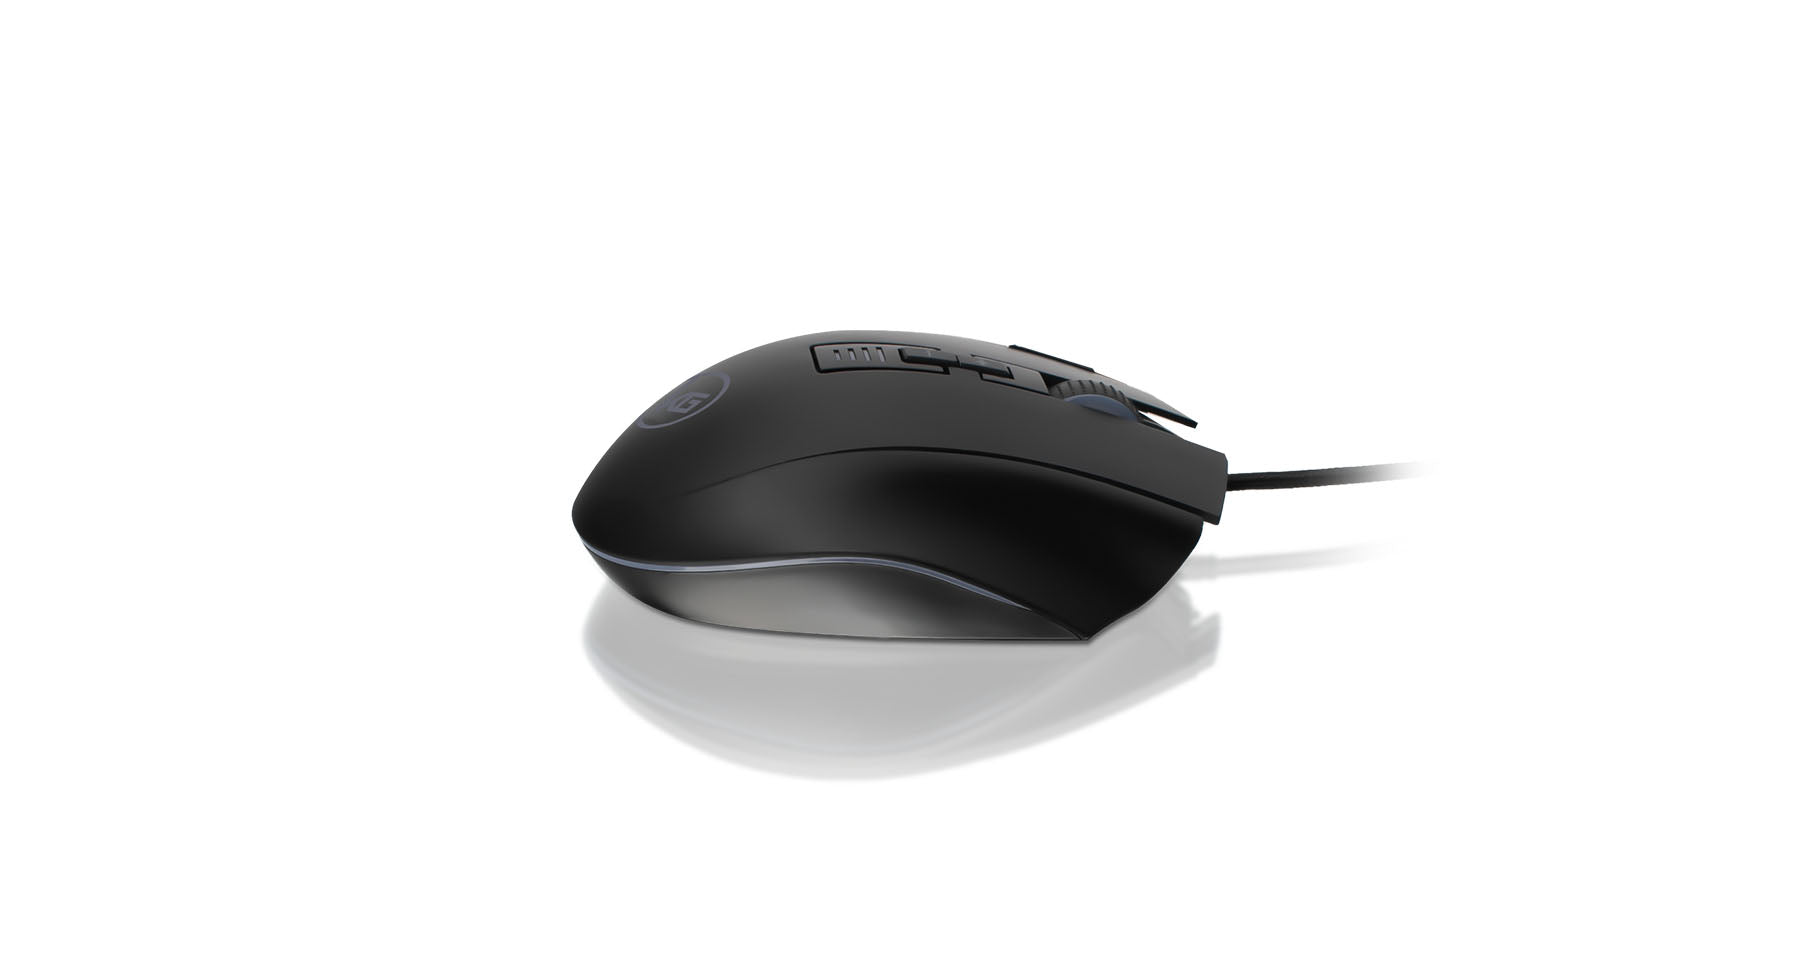 IOGEAR Gaming MOMENTUM Pro MMO Gaming Mouse